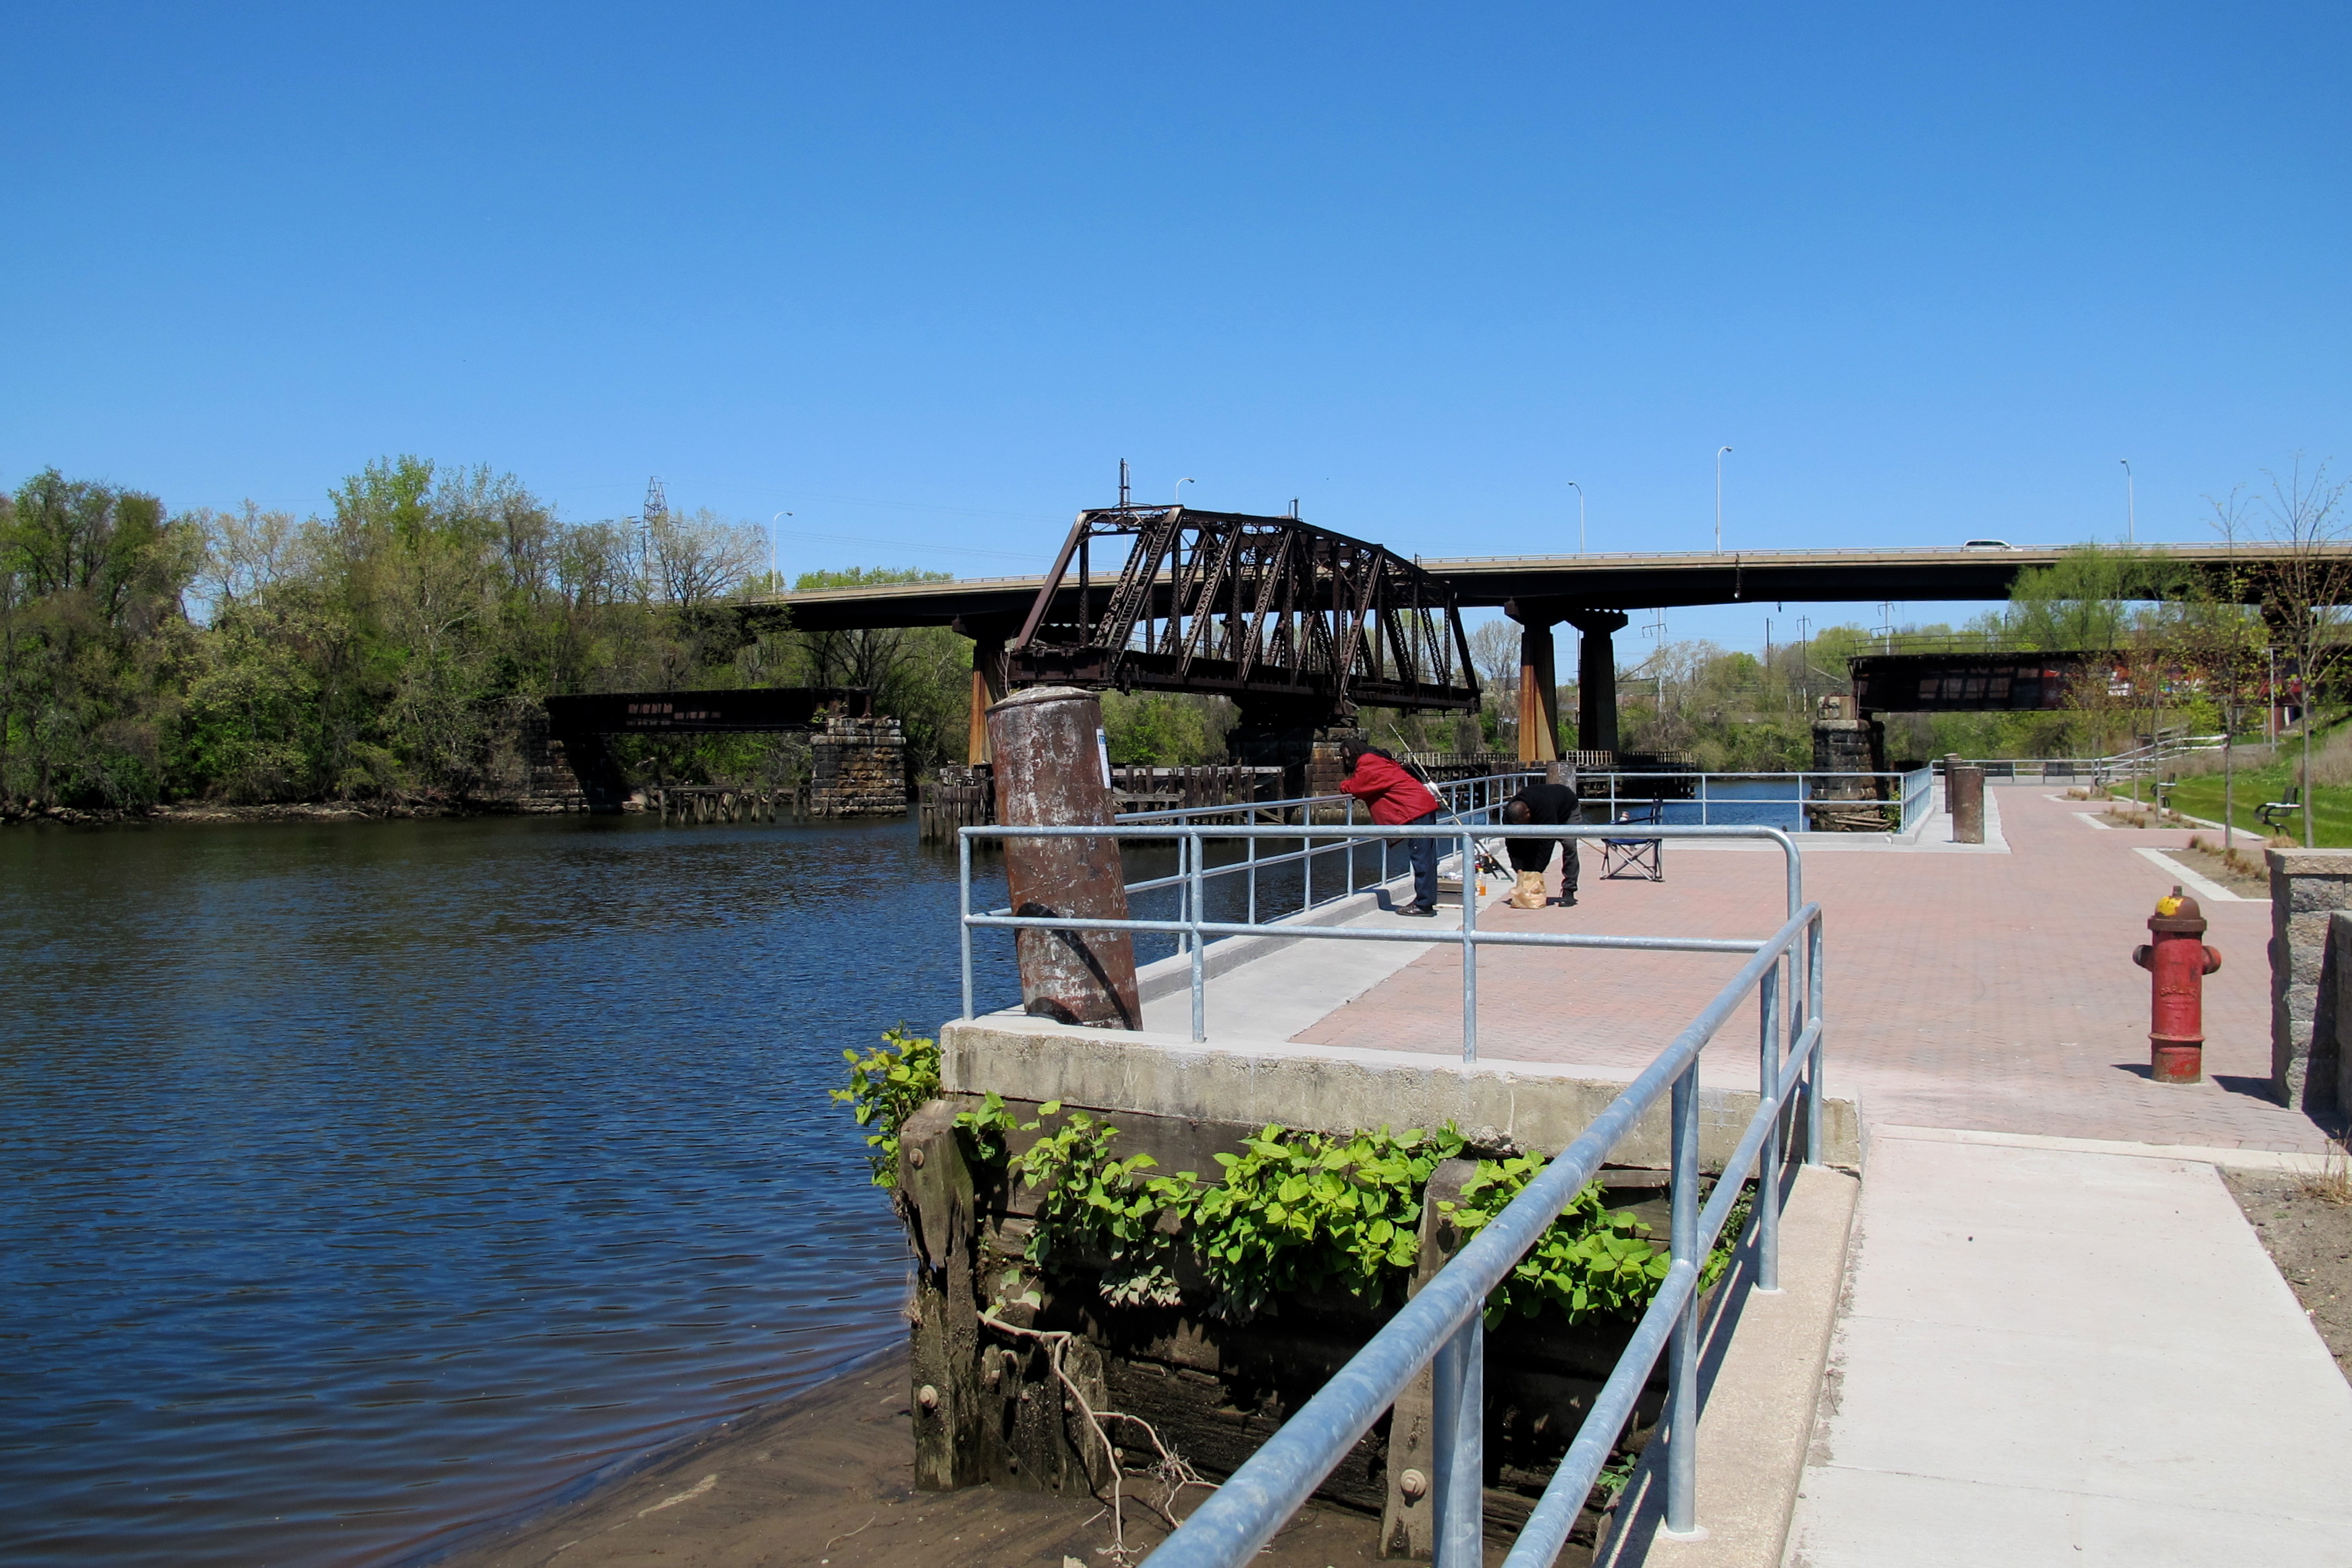 Will the swing bridge next to the Gray's Ferry bridge be reused to connect Gray's Ferry Crescent with Bartram's Mile?